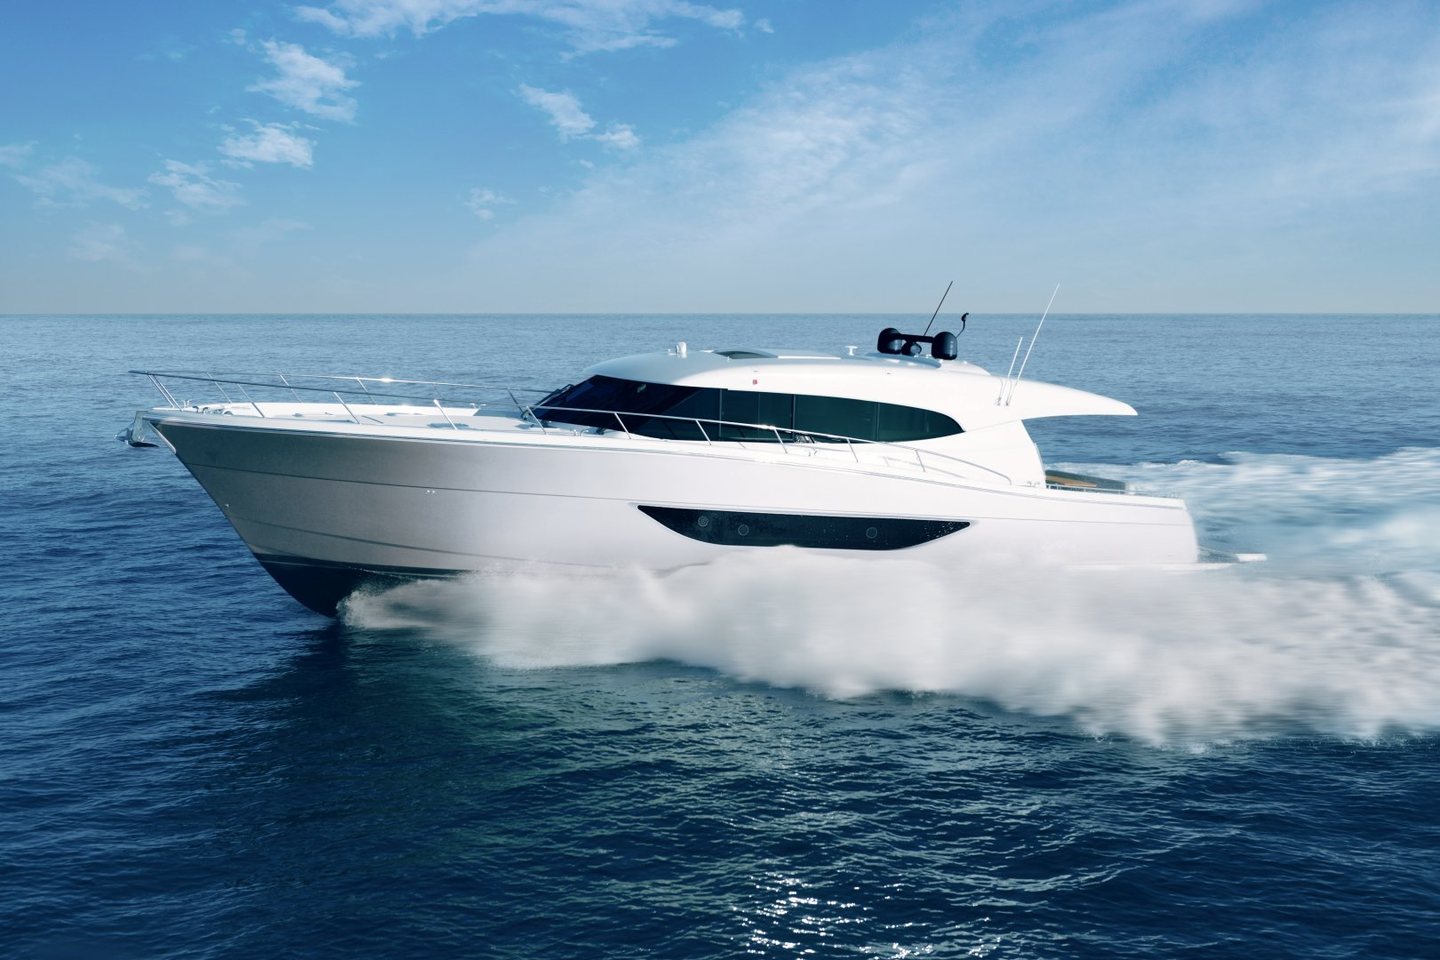 360 VR Virtual Tours of the Maritimo S70